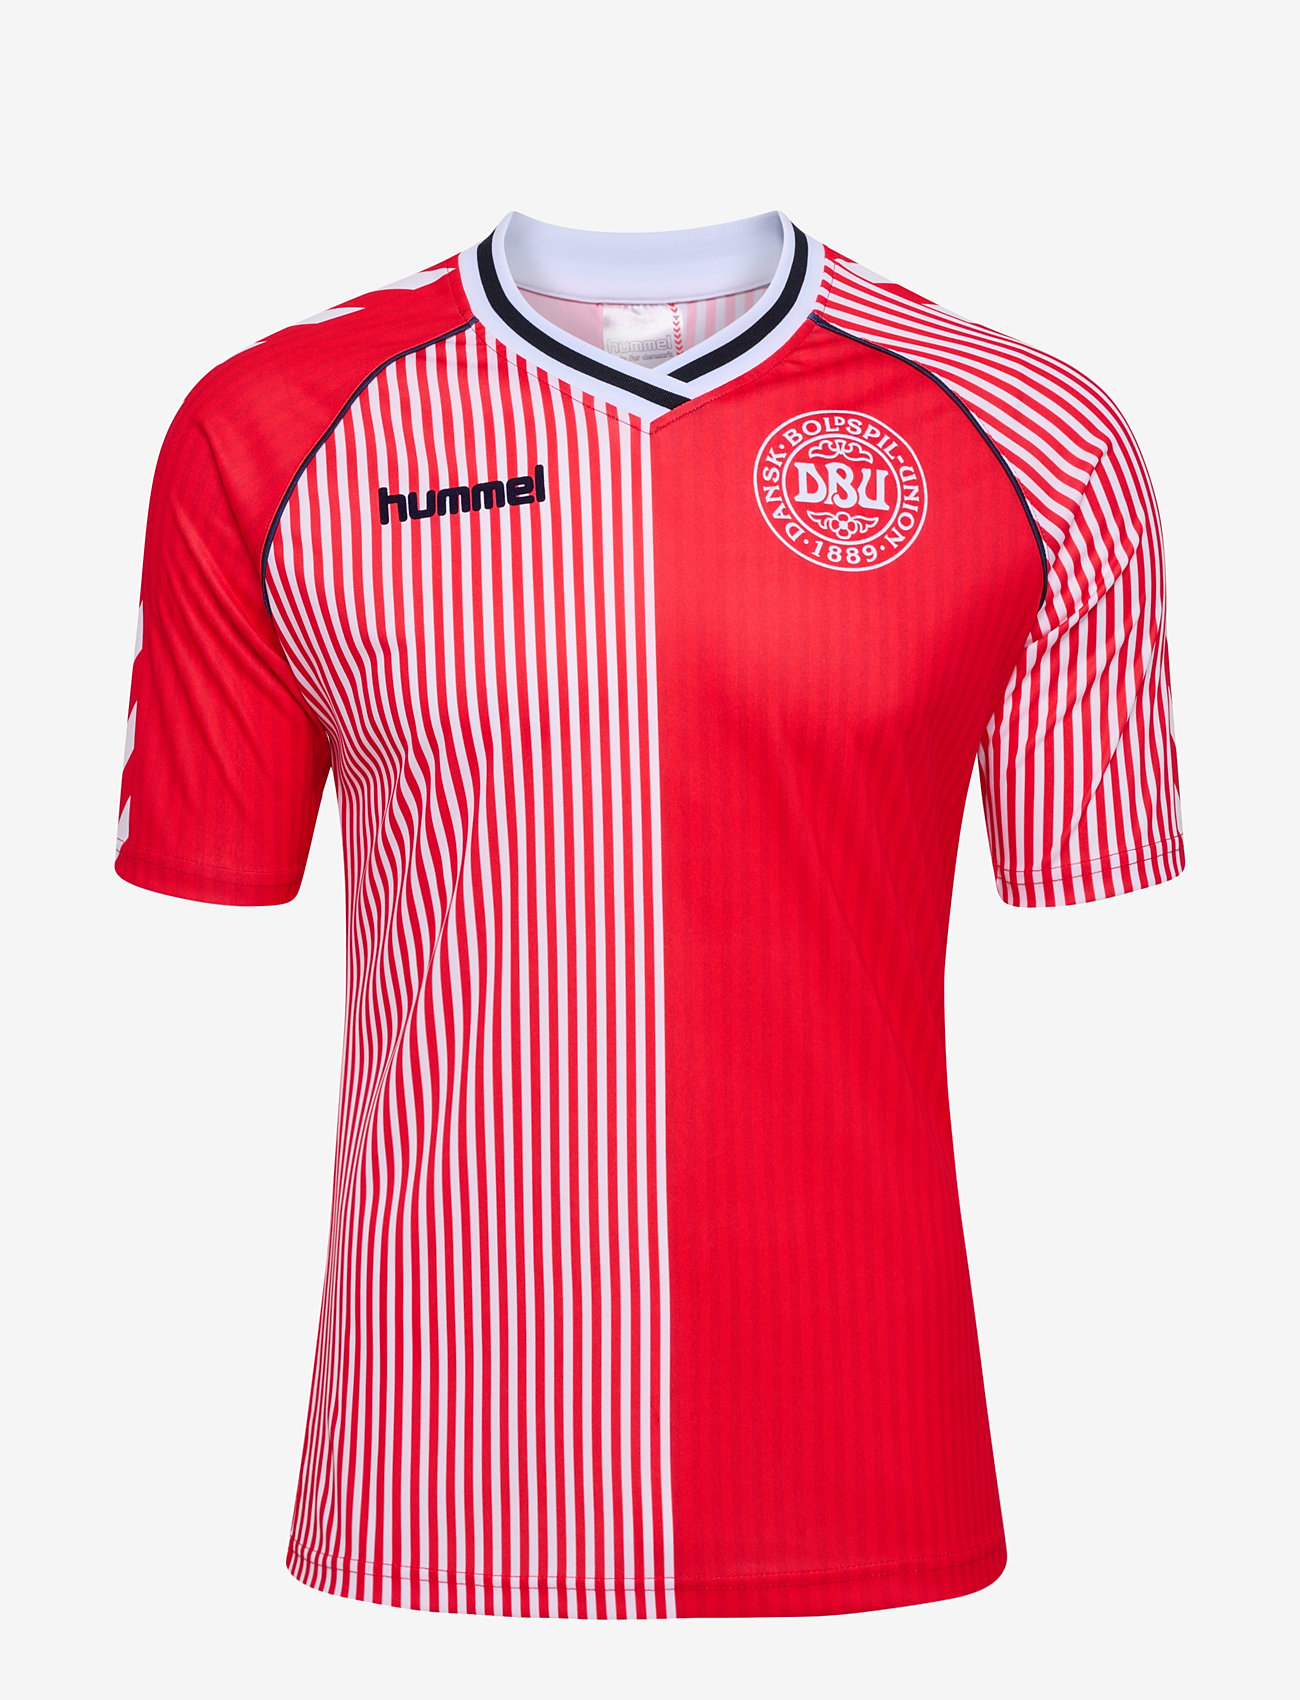 Hummel - DBU 86 REPLICA JERSEY S/S - clothes - red/white - 1